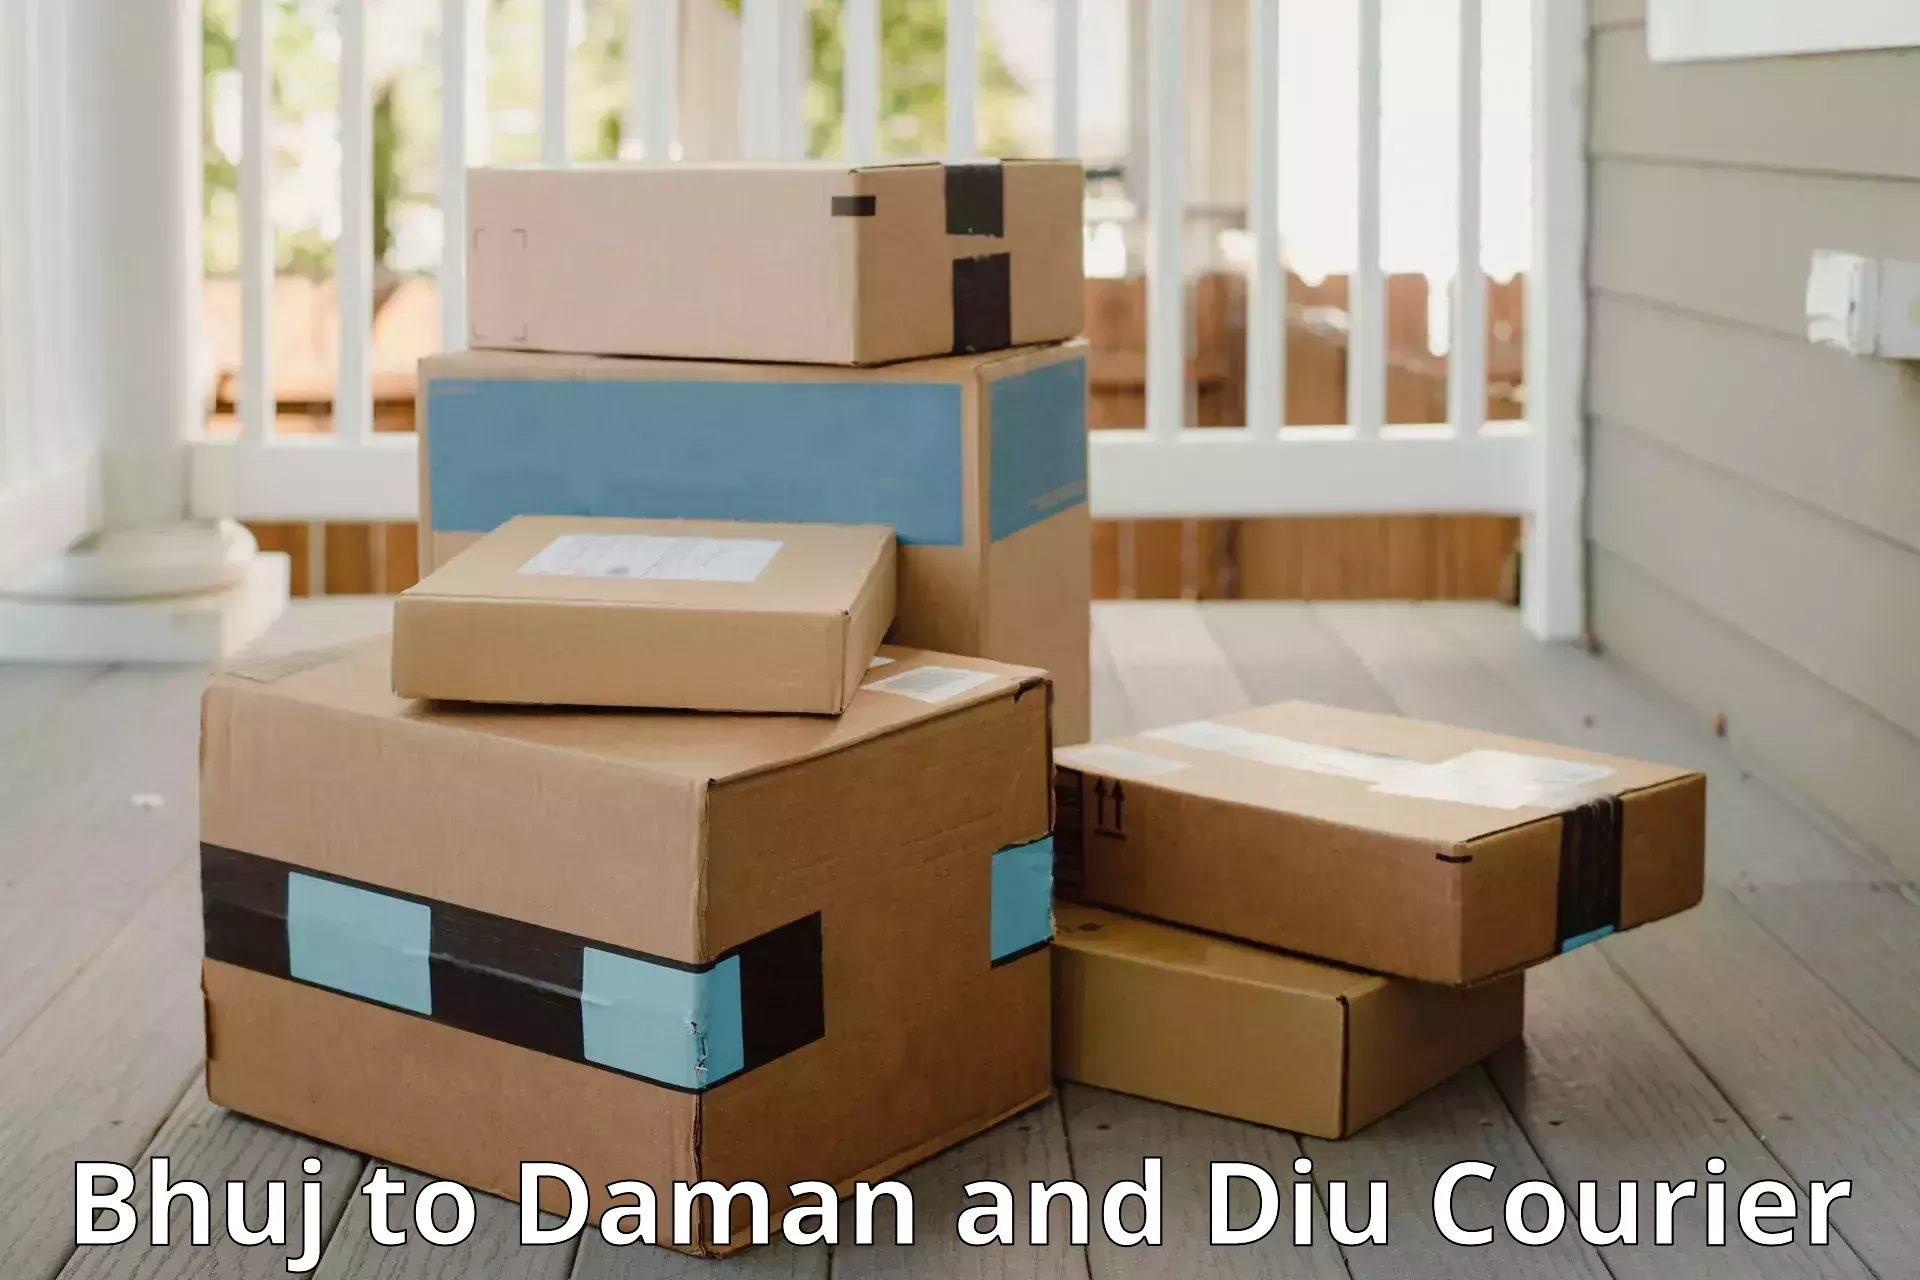 Luggage shipment specialists in Bhuj to Diu